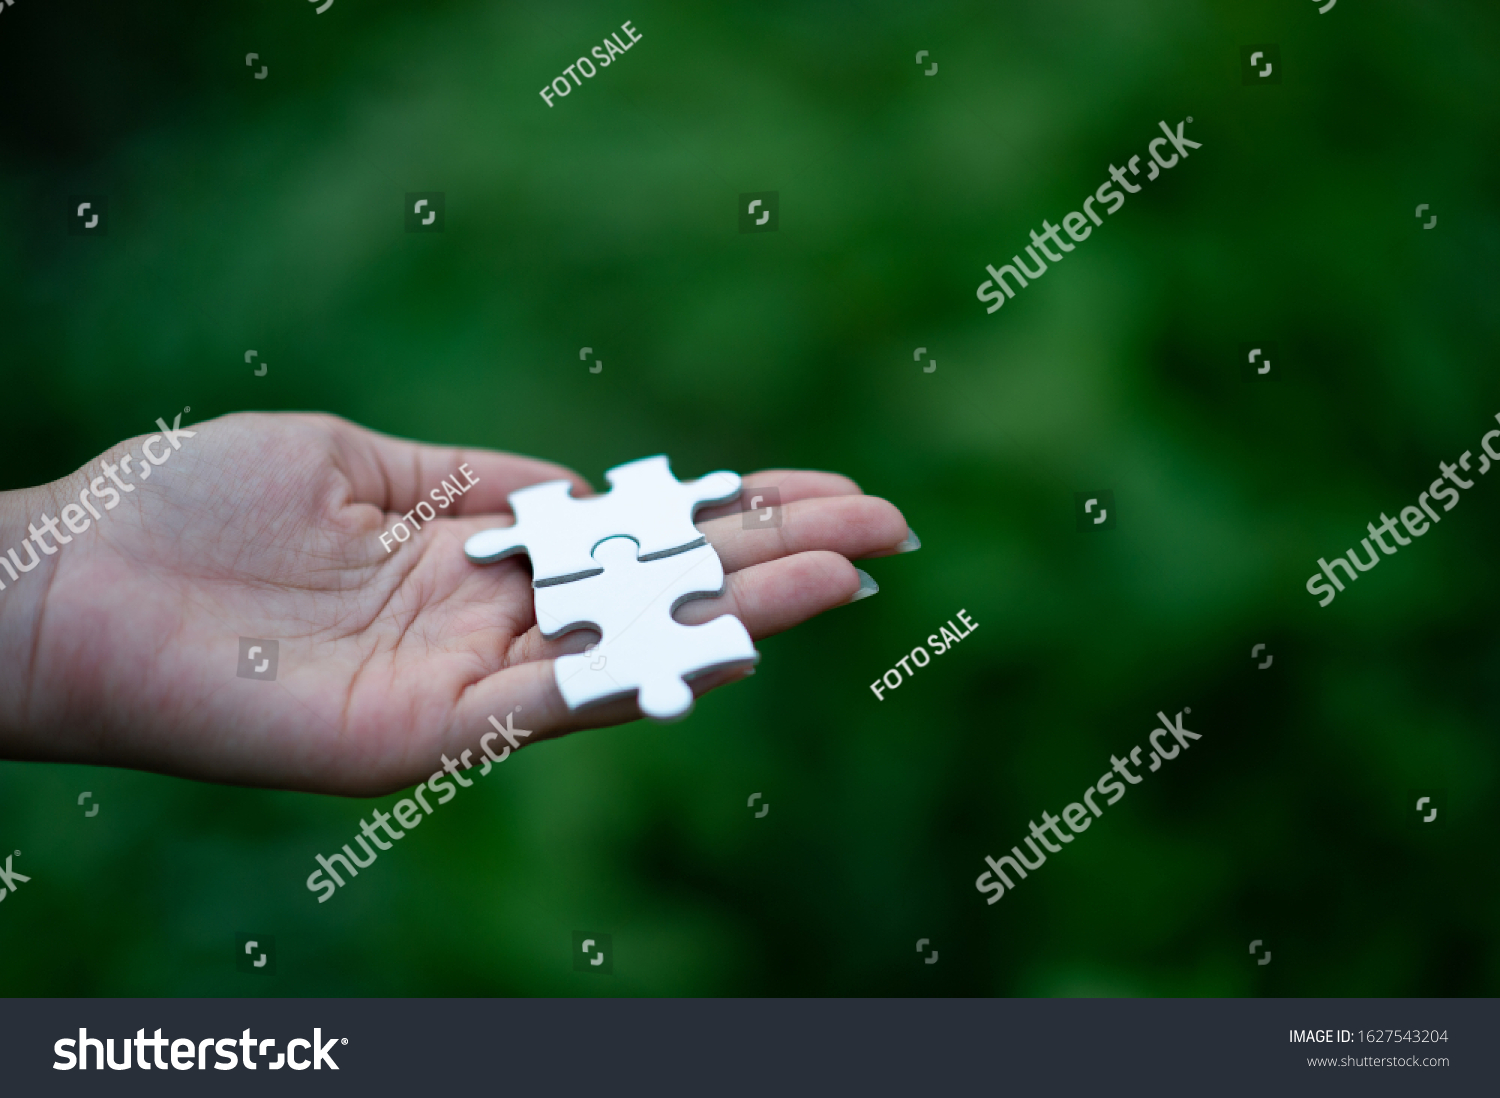 Hands and puzzles, important pieces of teamwork Teamwork concept #1627543204